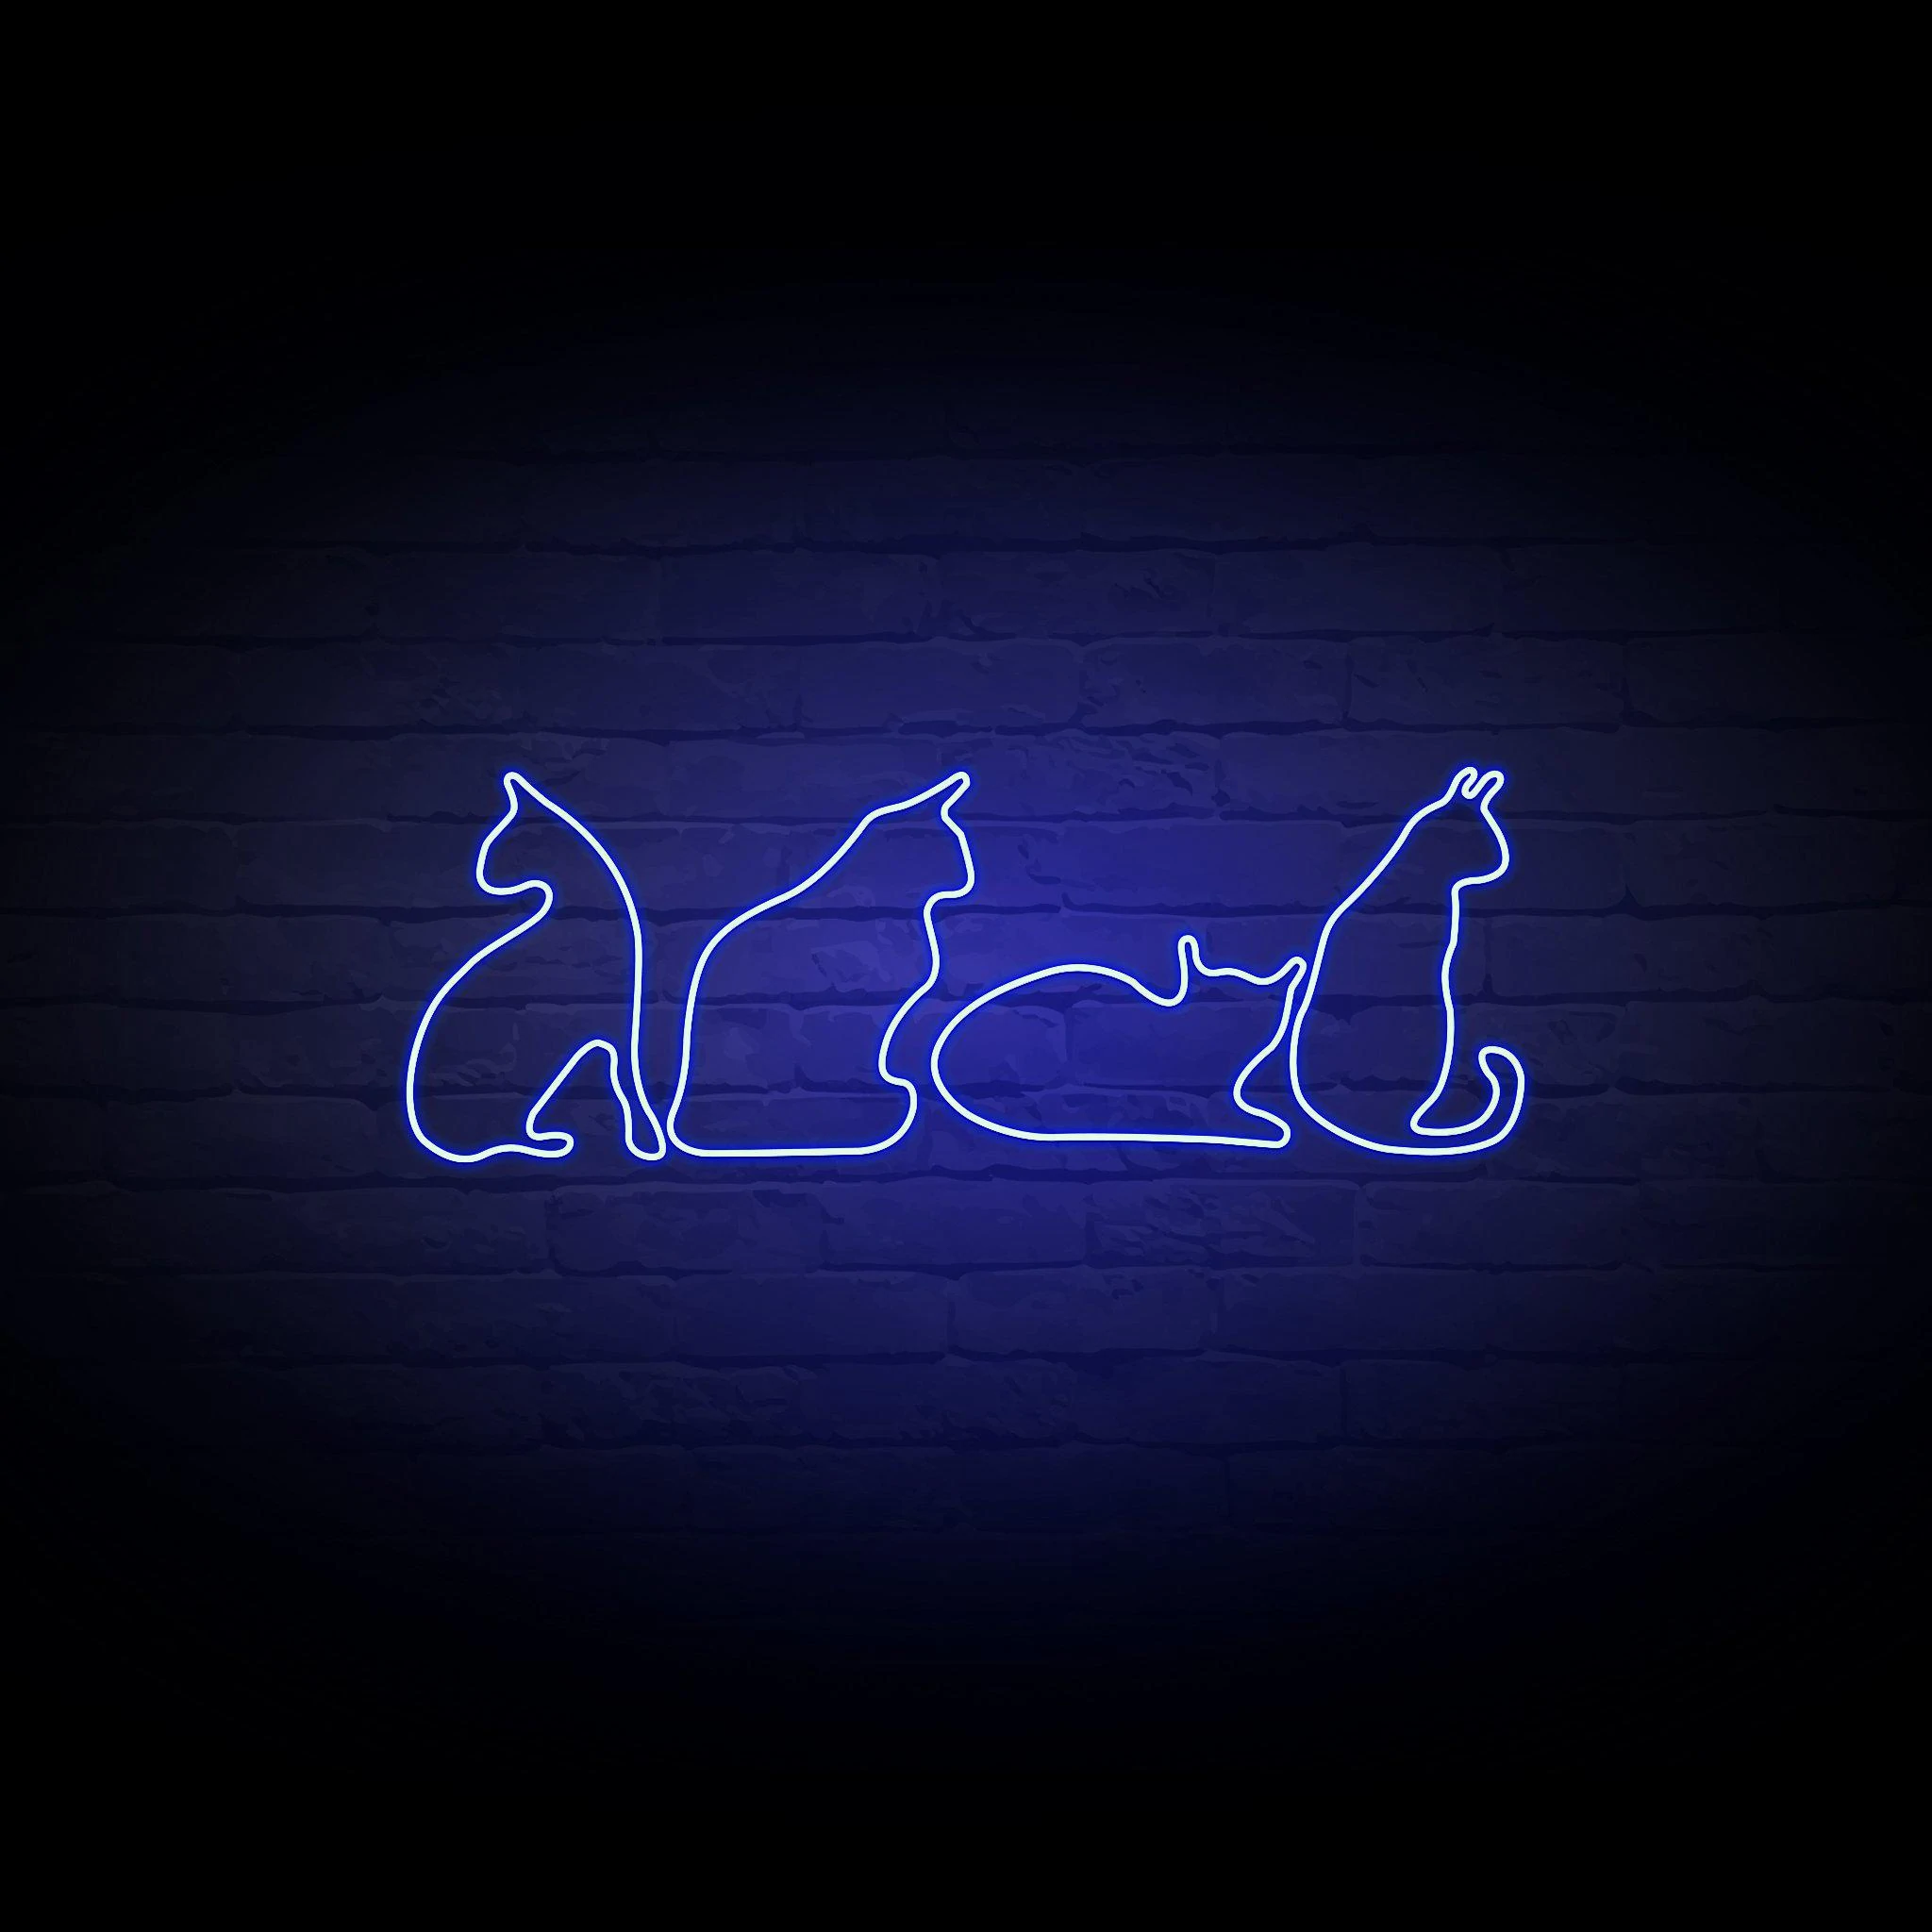 'CATS' NEON SIGN